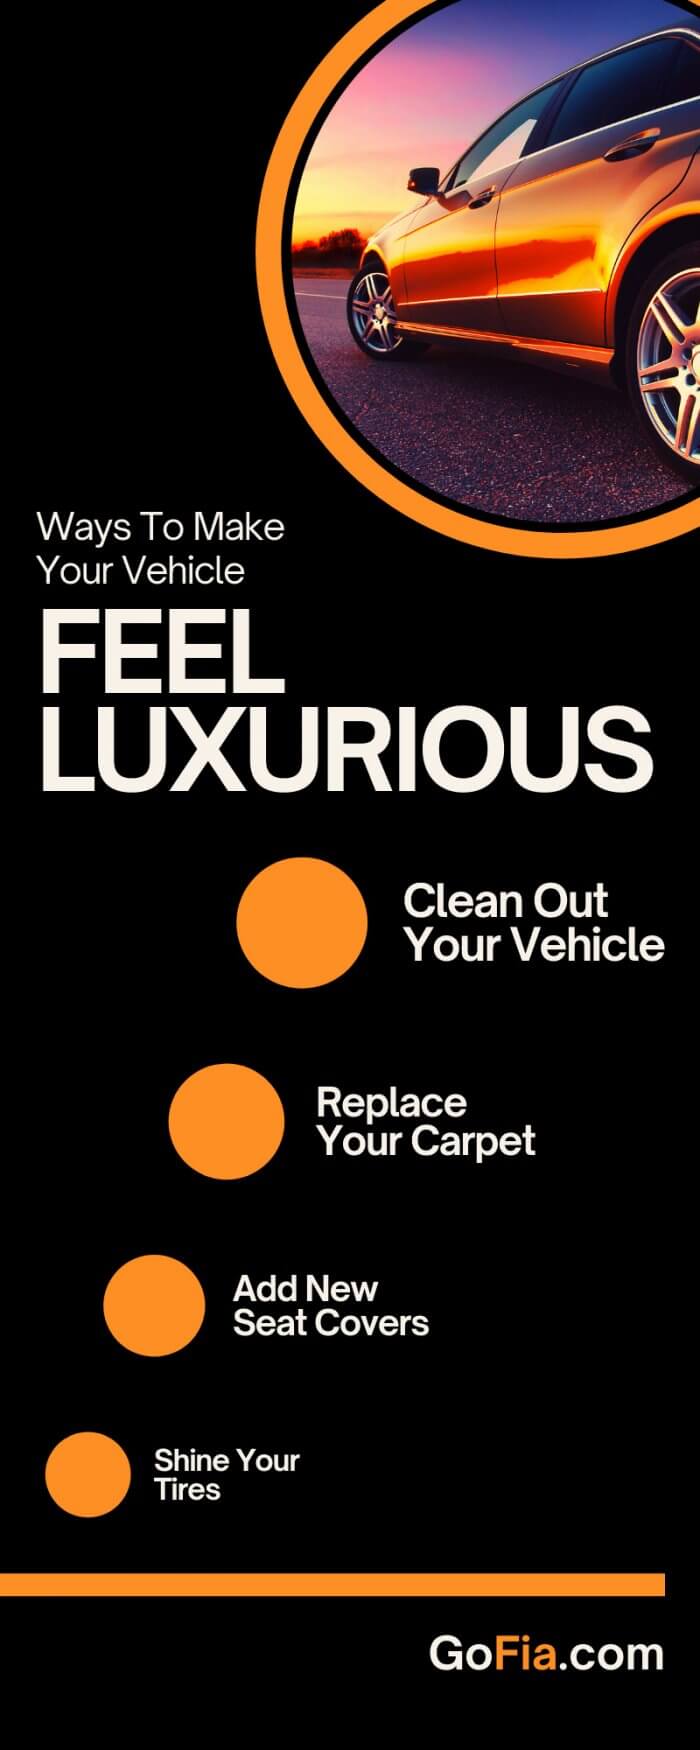 Ways To Make Your Vehicle Feel Luxurious